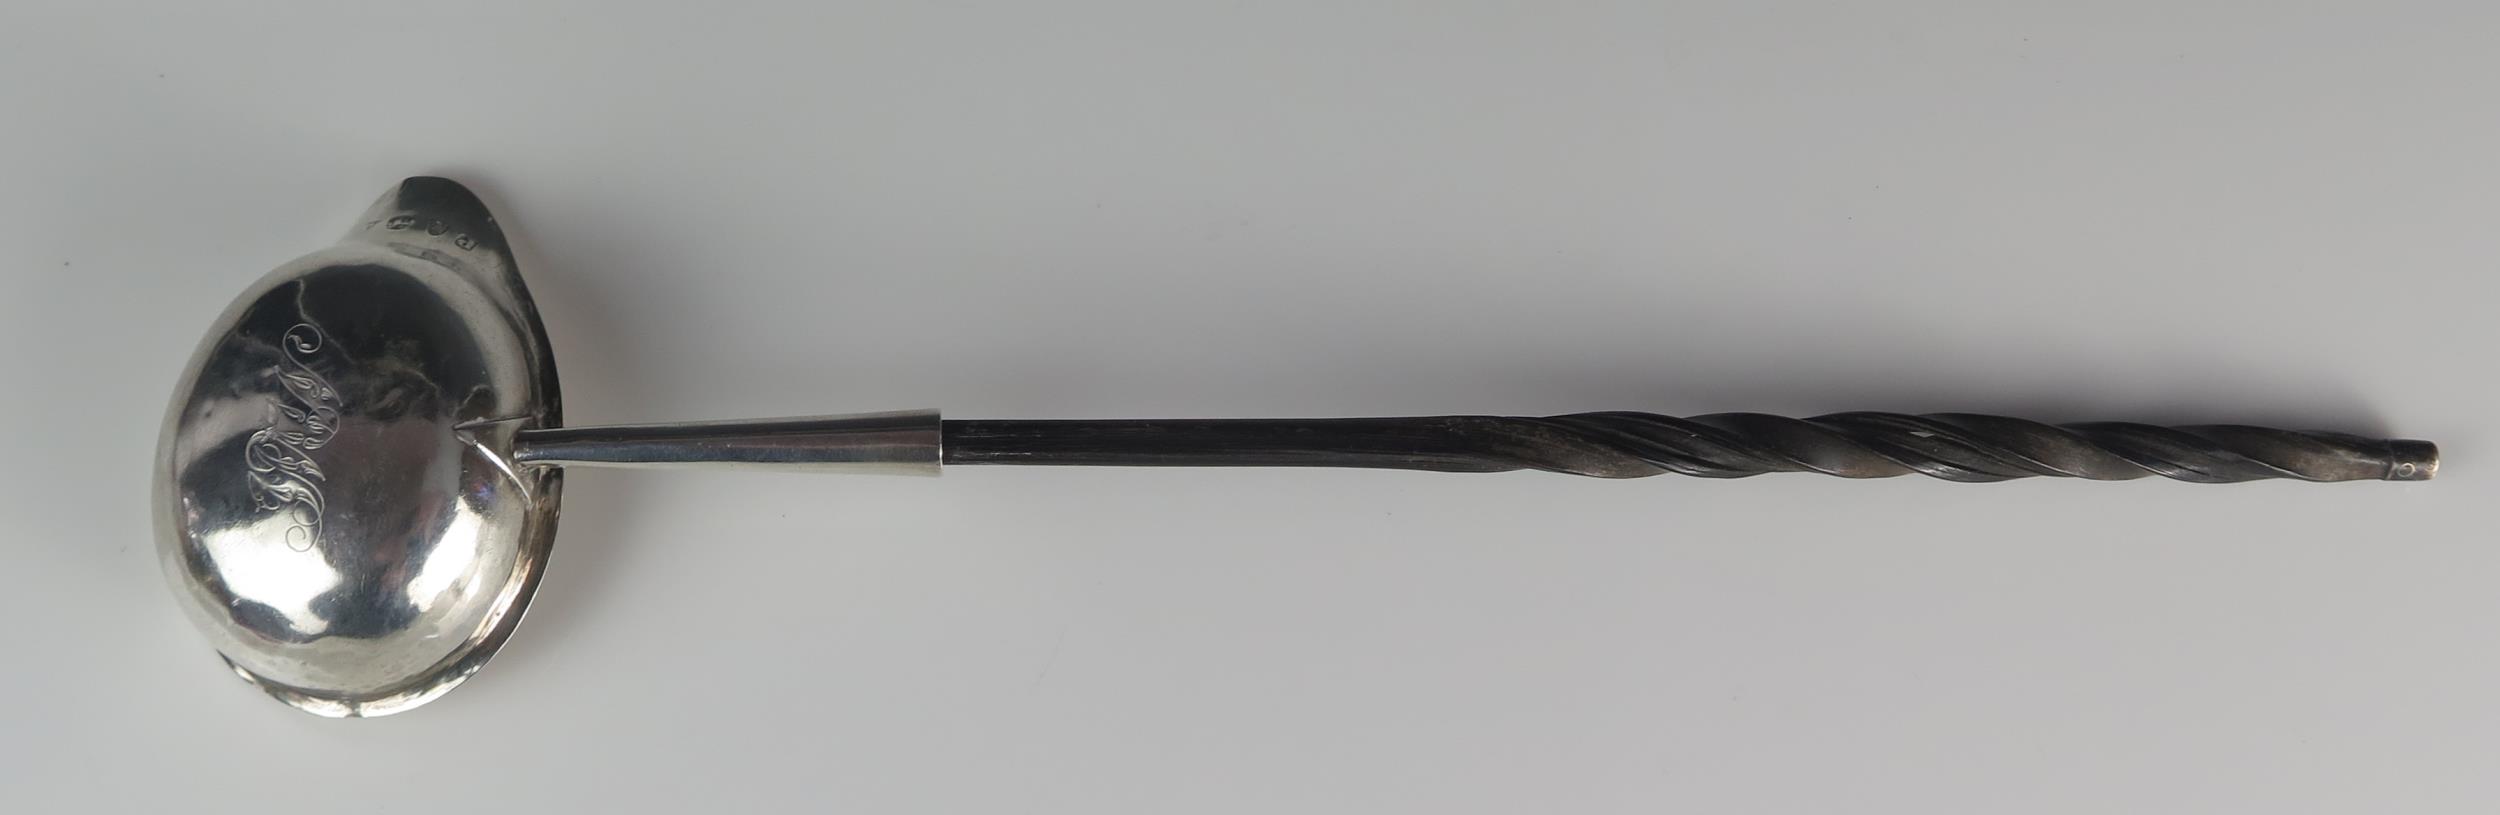 A George III silver toddy ladle, makers mark worn possibly T.S, London, 1779, monogrammed, mounted - Image 2 of 4